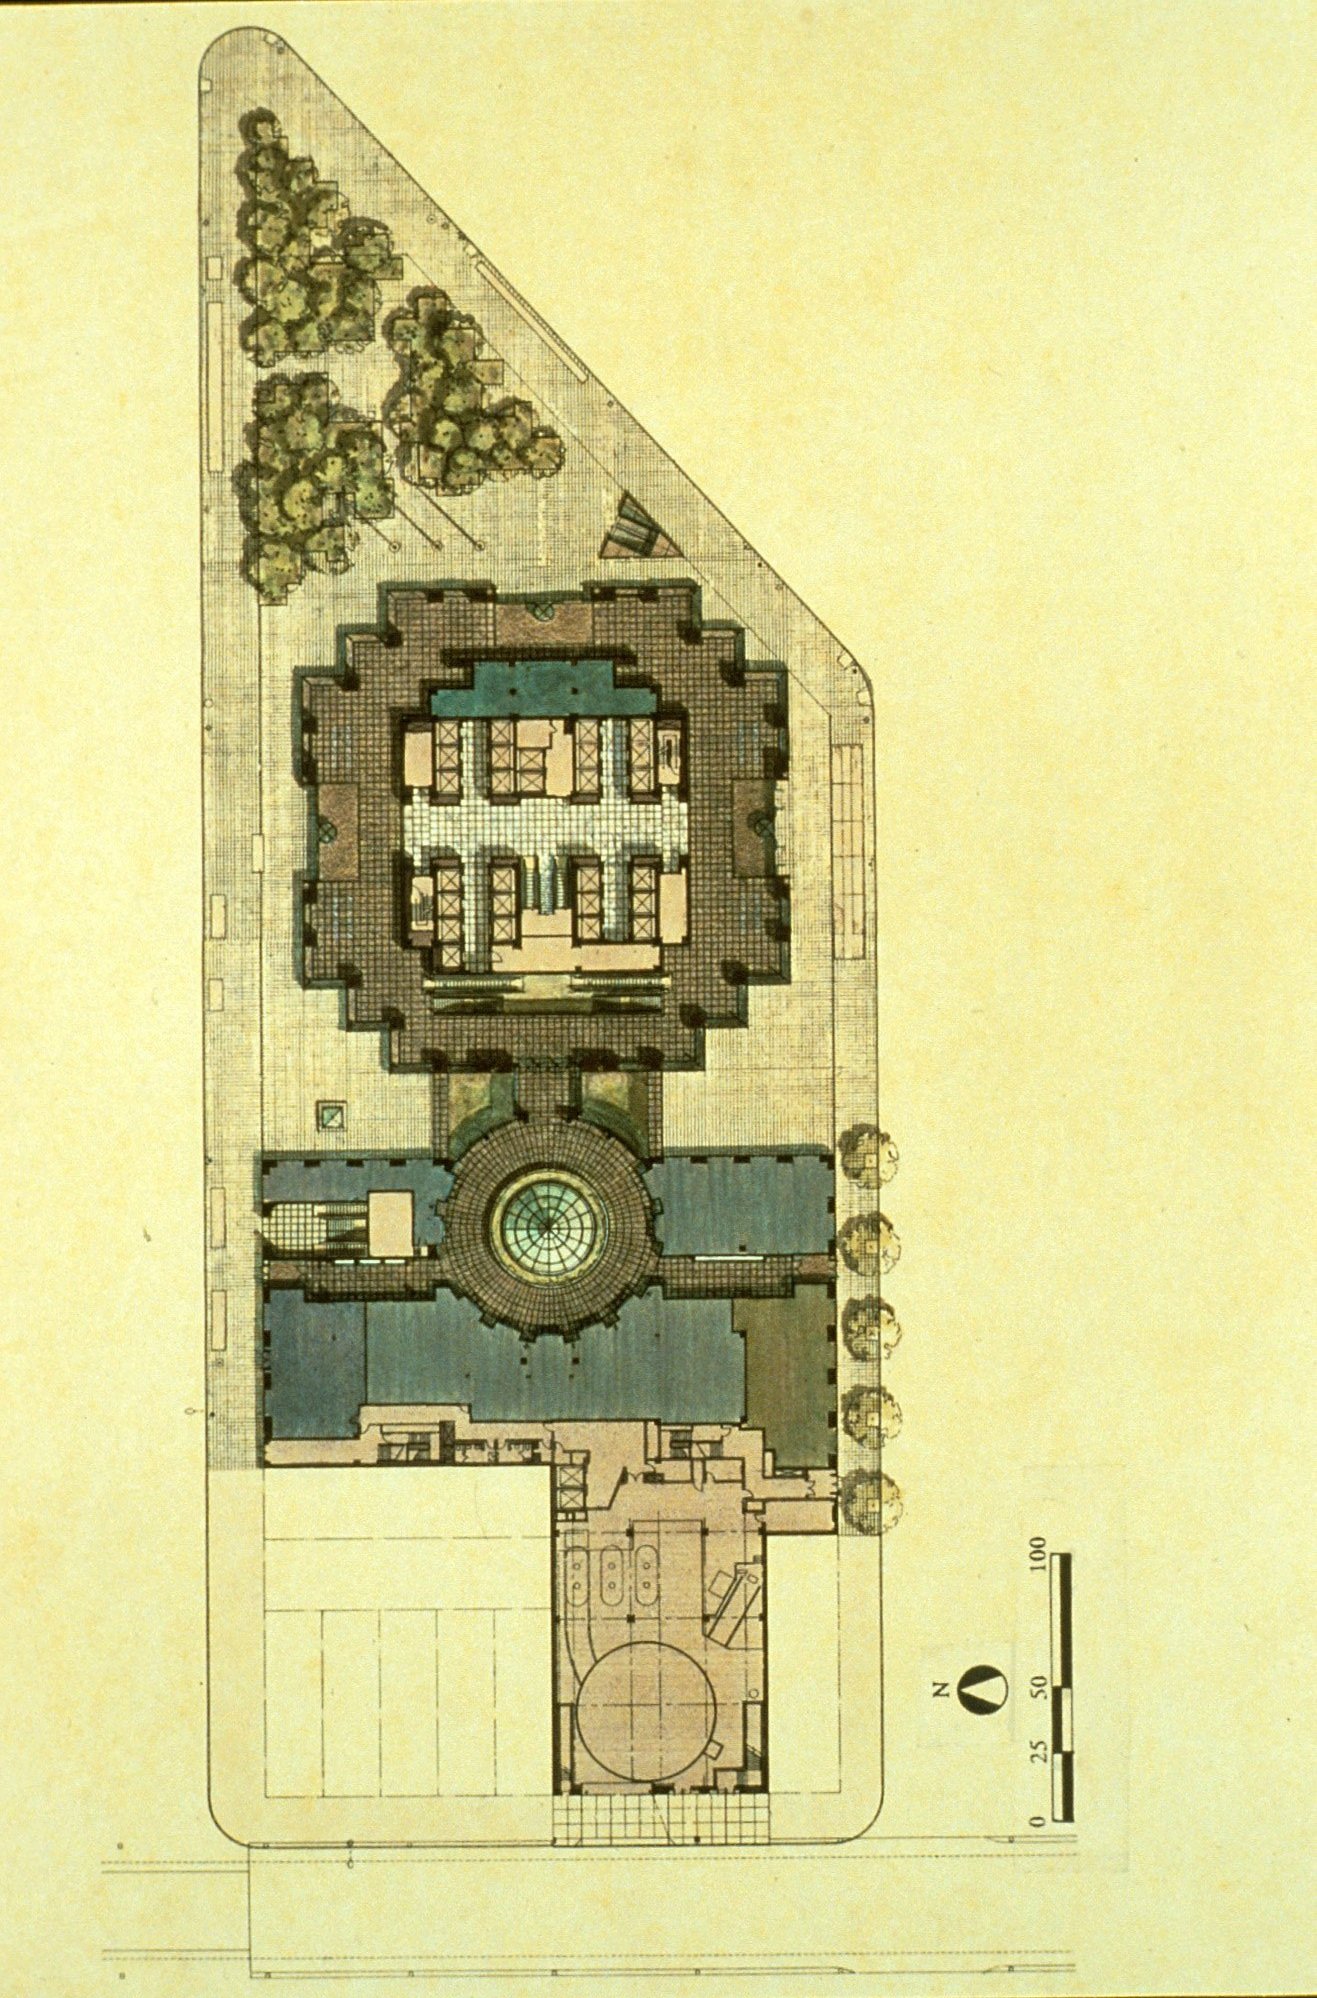  One Court Square site plan.  